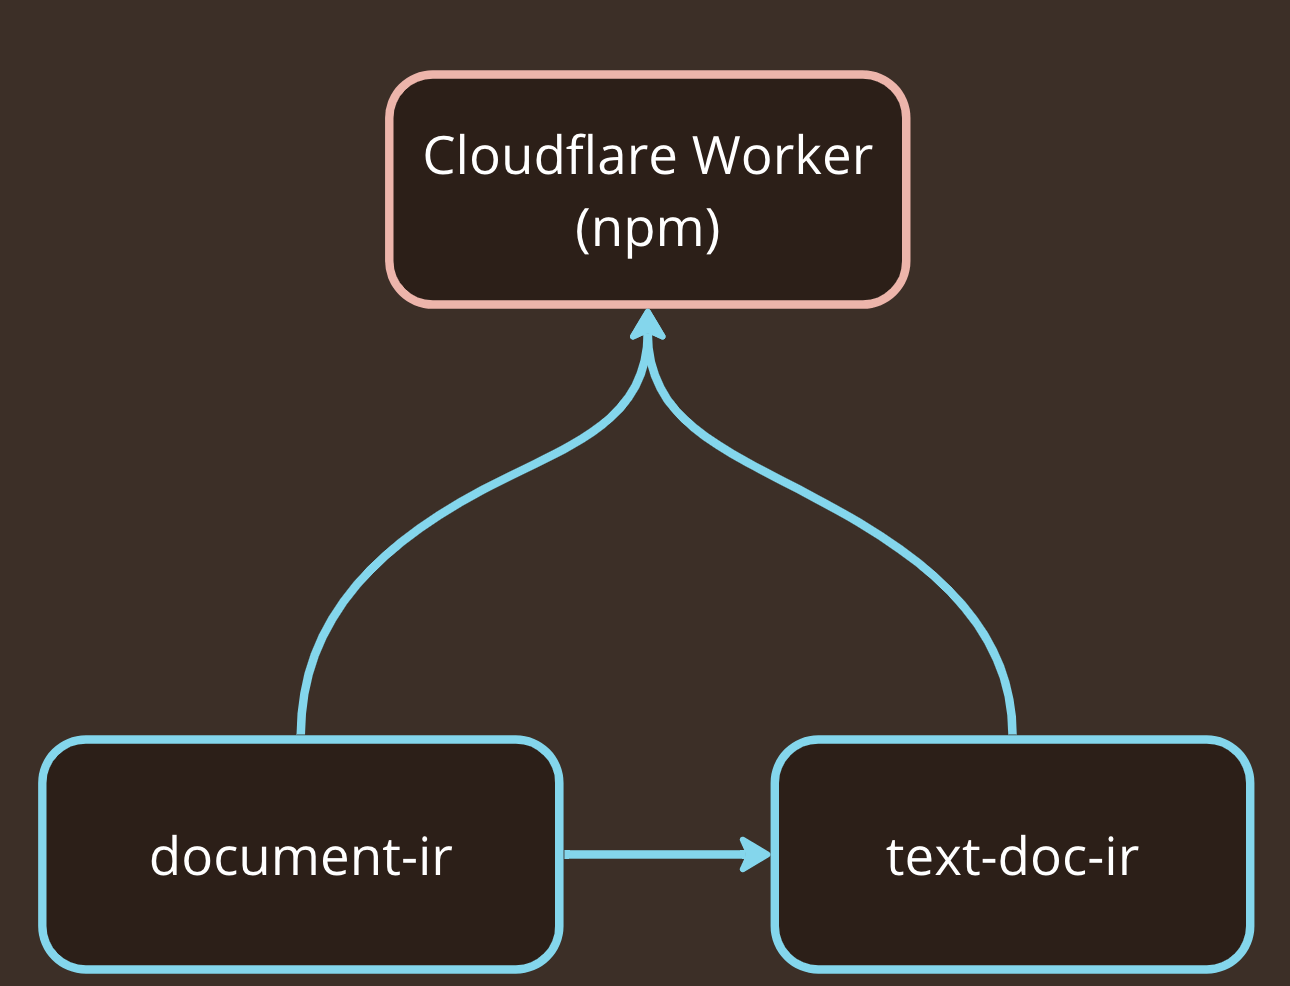 A diagram of how document-ir is used by the web worker and by text-doc-ir, and how text-doc-ir is used by the web worker.